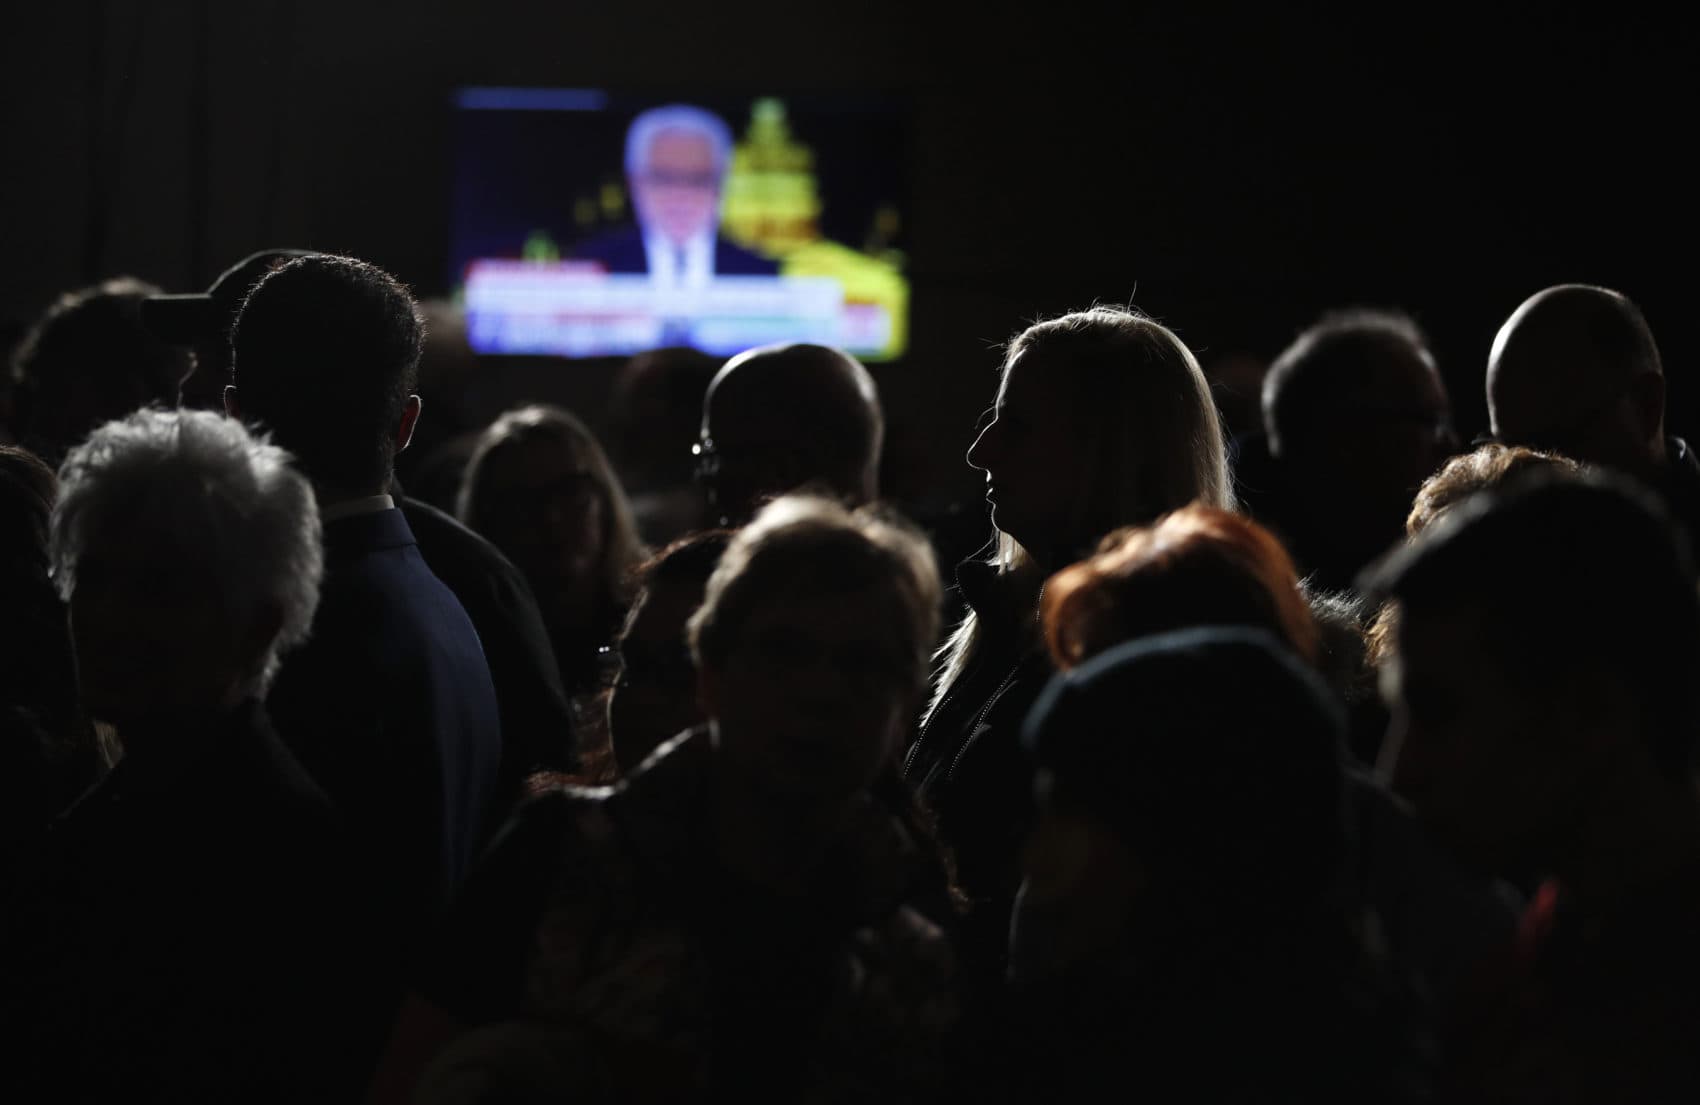 People wait for results at a caucus night campaign rally for democratic presidential candidate former Vice President Joe Biden on Monday in Des Moines, Iowa. (John Locher/AP)